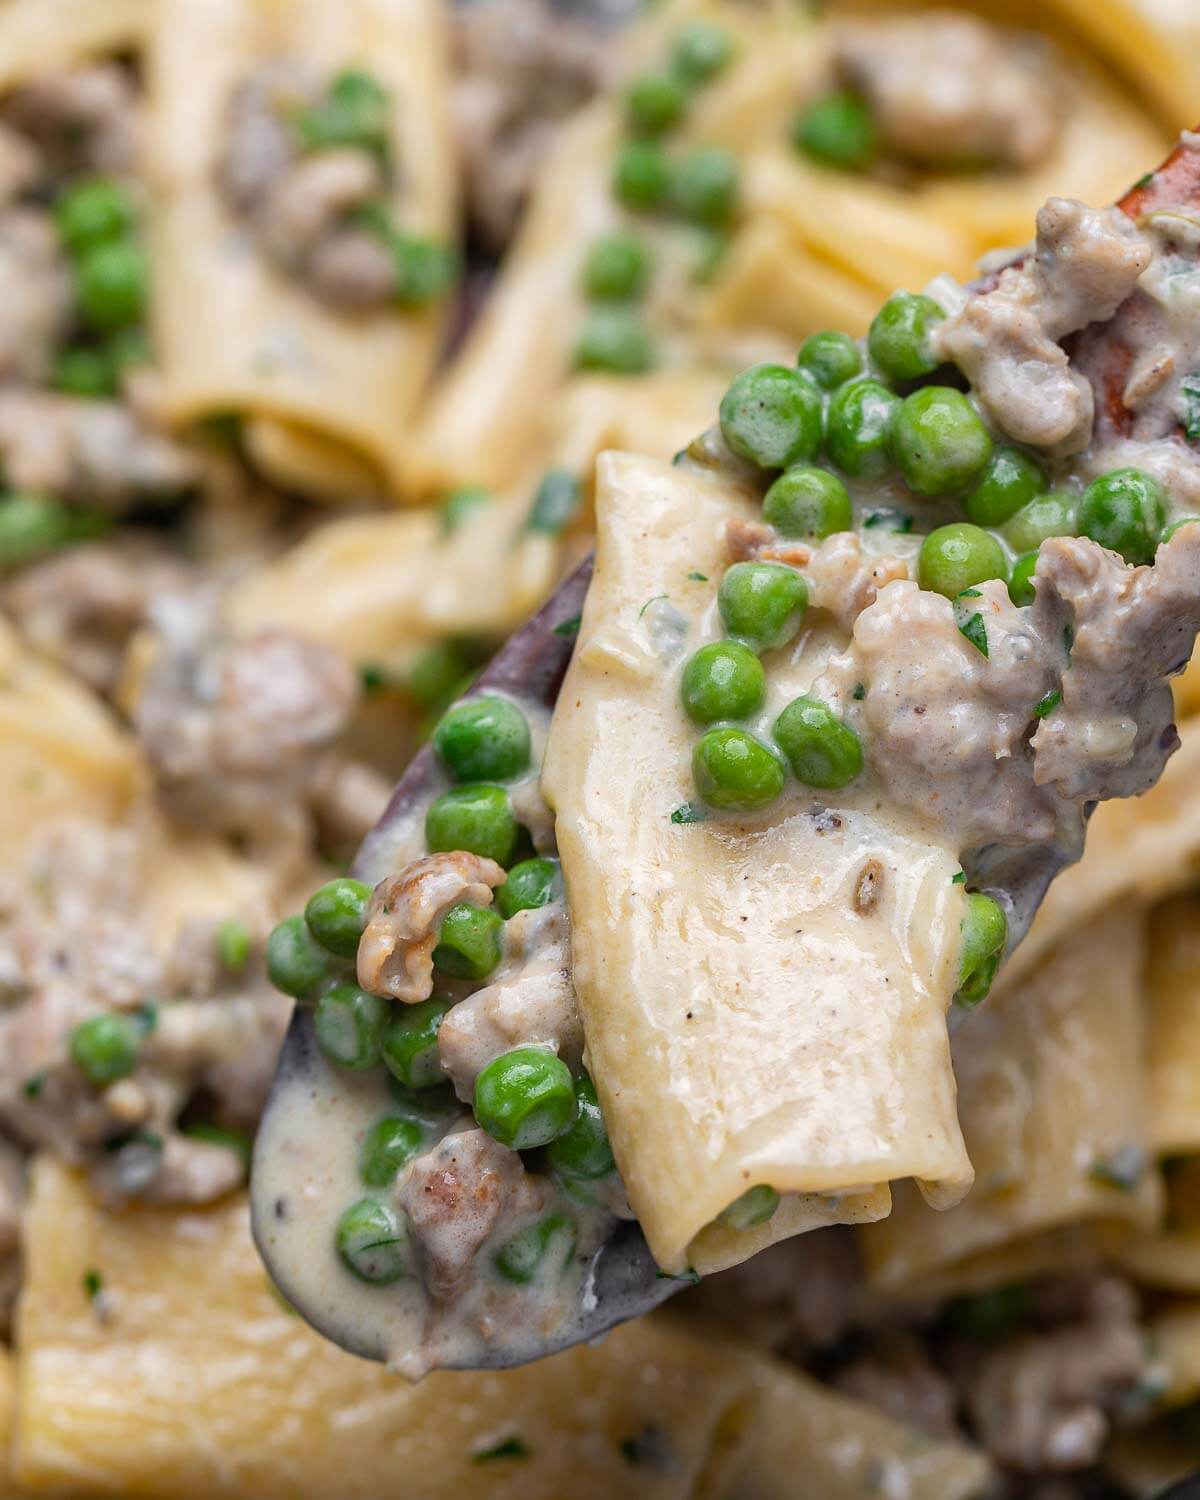 Wooden spoon holding one piece of rigatoni with peas and sausage.